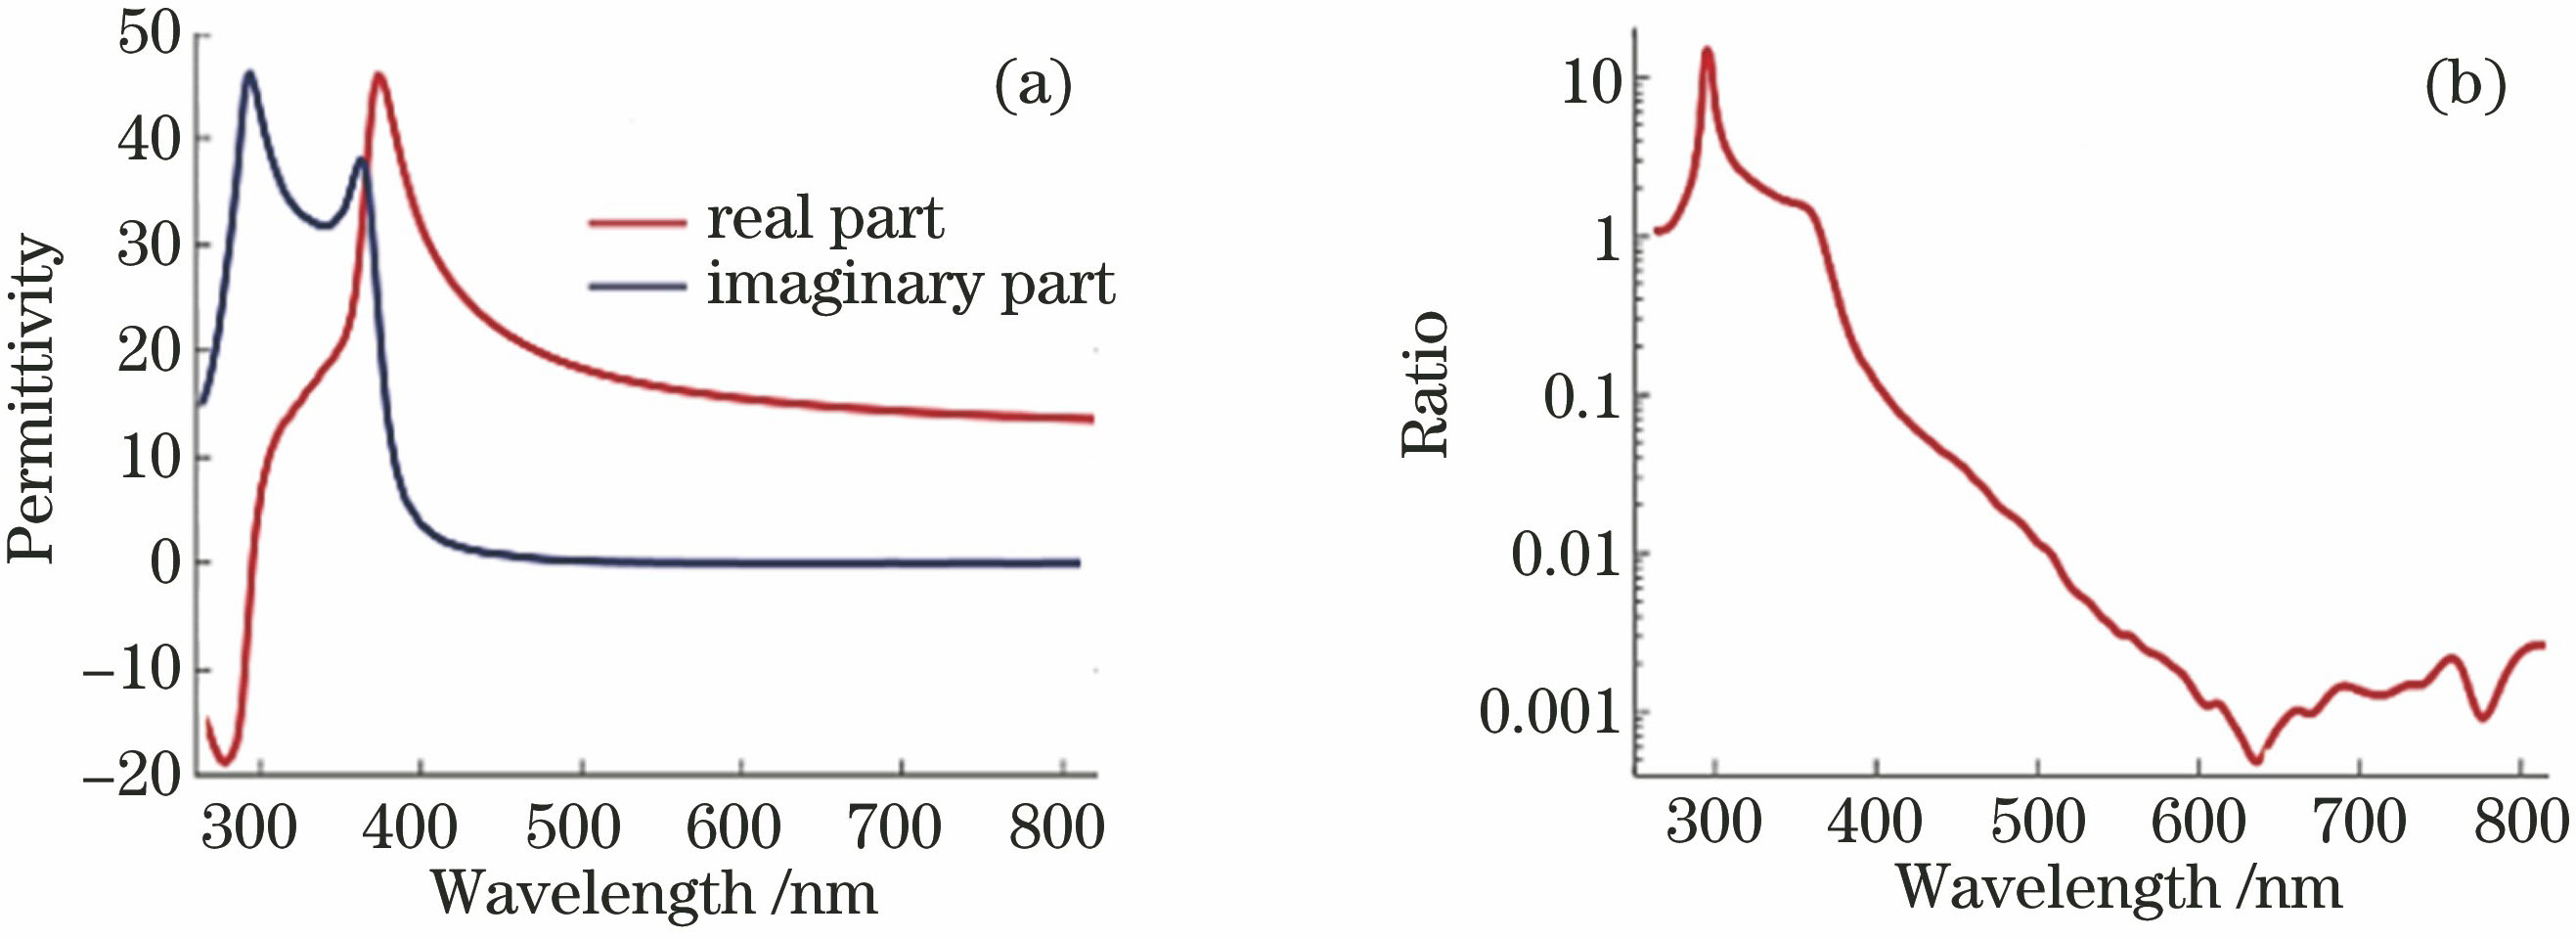 Spectral dependence properties of crystalline silicon at room temperature[36]. (a) Real and imaginary parts of refractive index; (b) ratio between electrical conduction current and displacement current